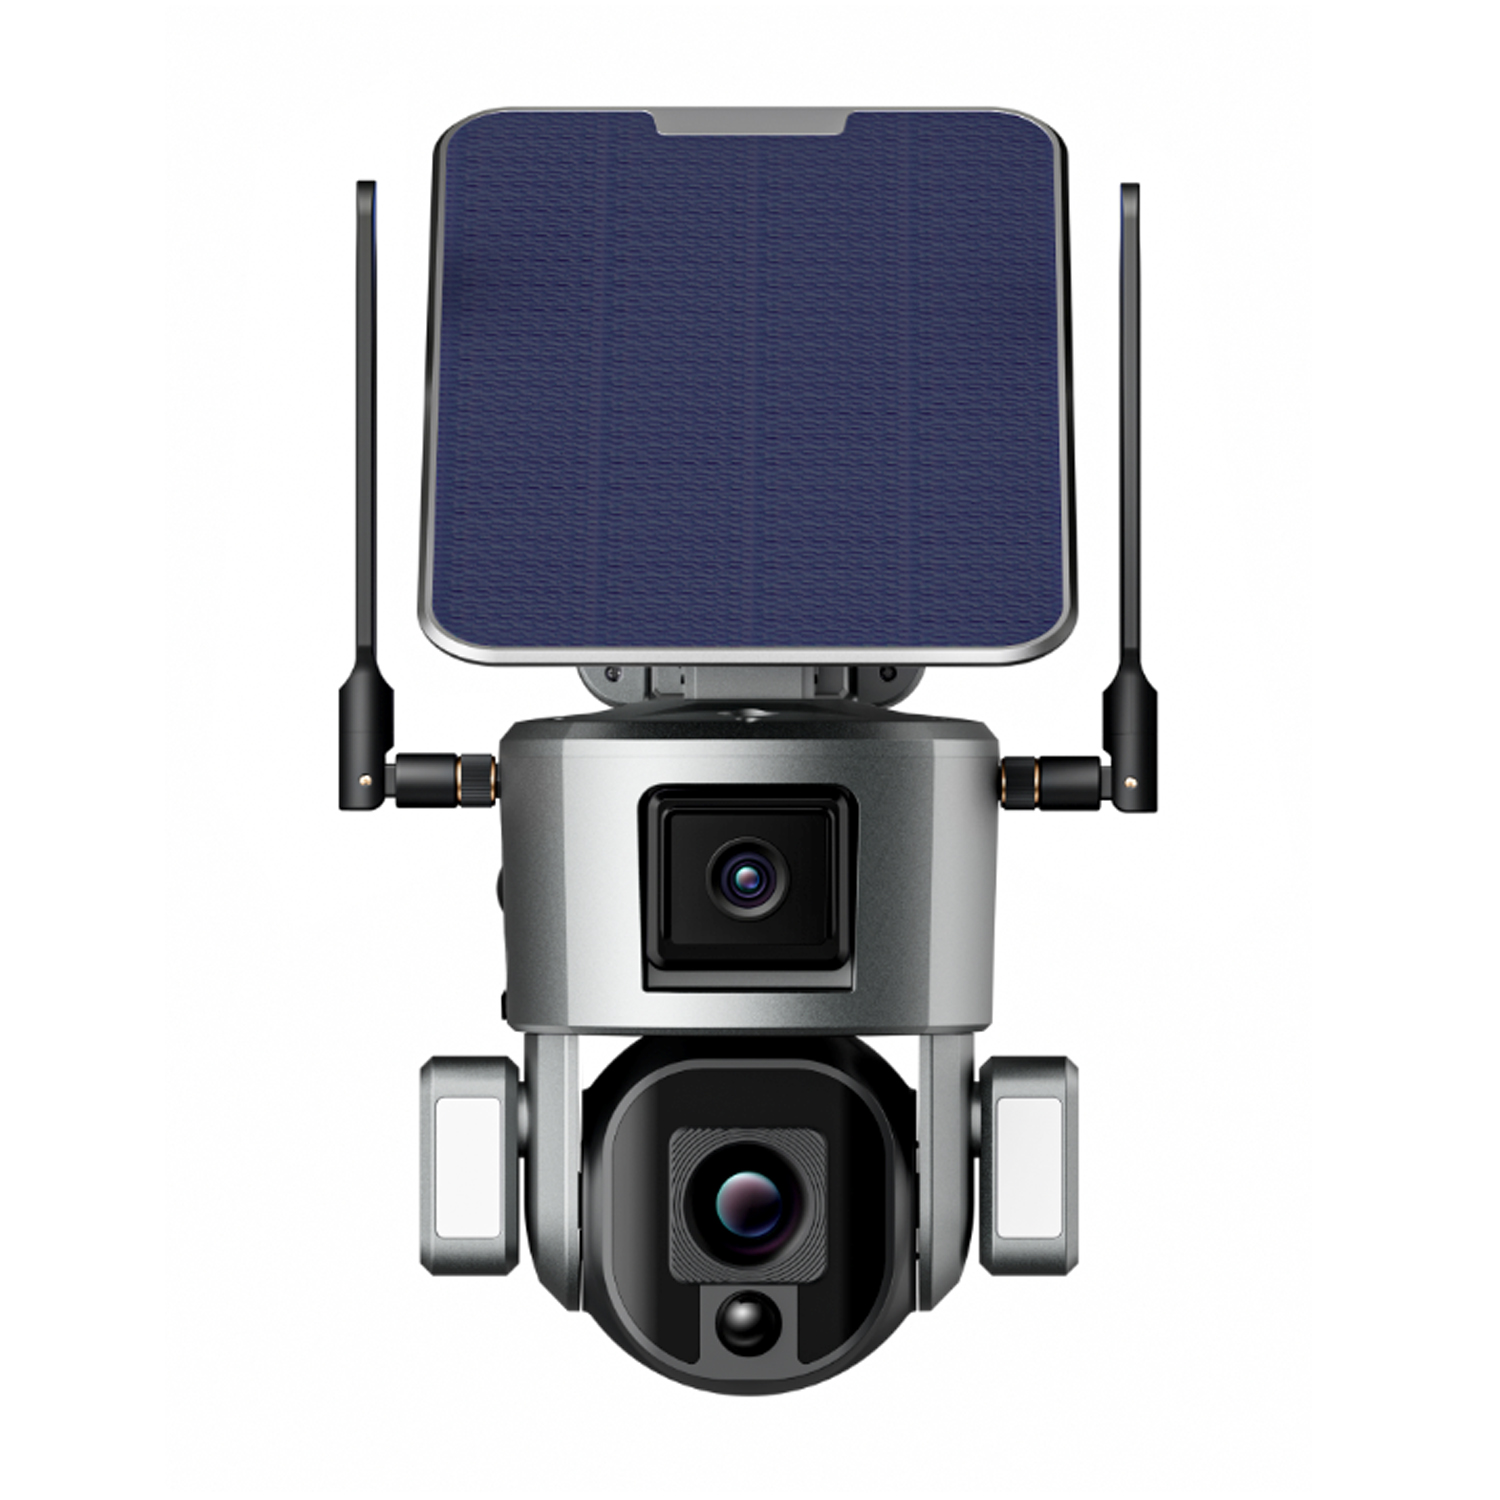 Y5 4G Solar Camera 4K HD Dual Scrceen Preview 10X Optical Zoom Night Vision Two-way Voice with 6W Solar Panel WIFI Solar Camera Waterproof low power consumption dual lens 10x convertible lens 8mp 2.8-12mm 120 degree wide lens wifi ptz 4g solar camera